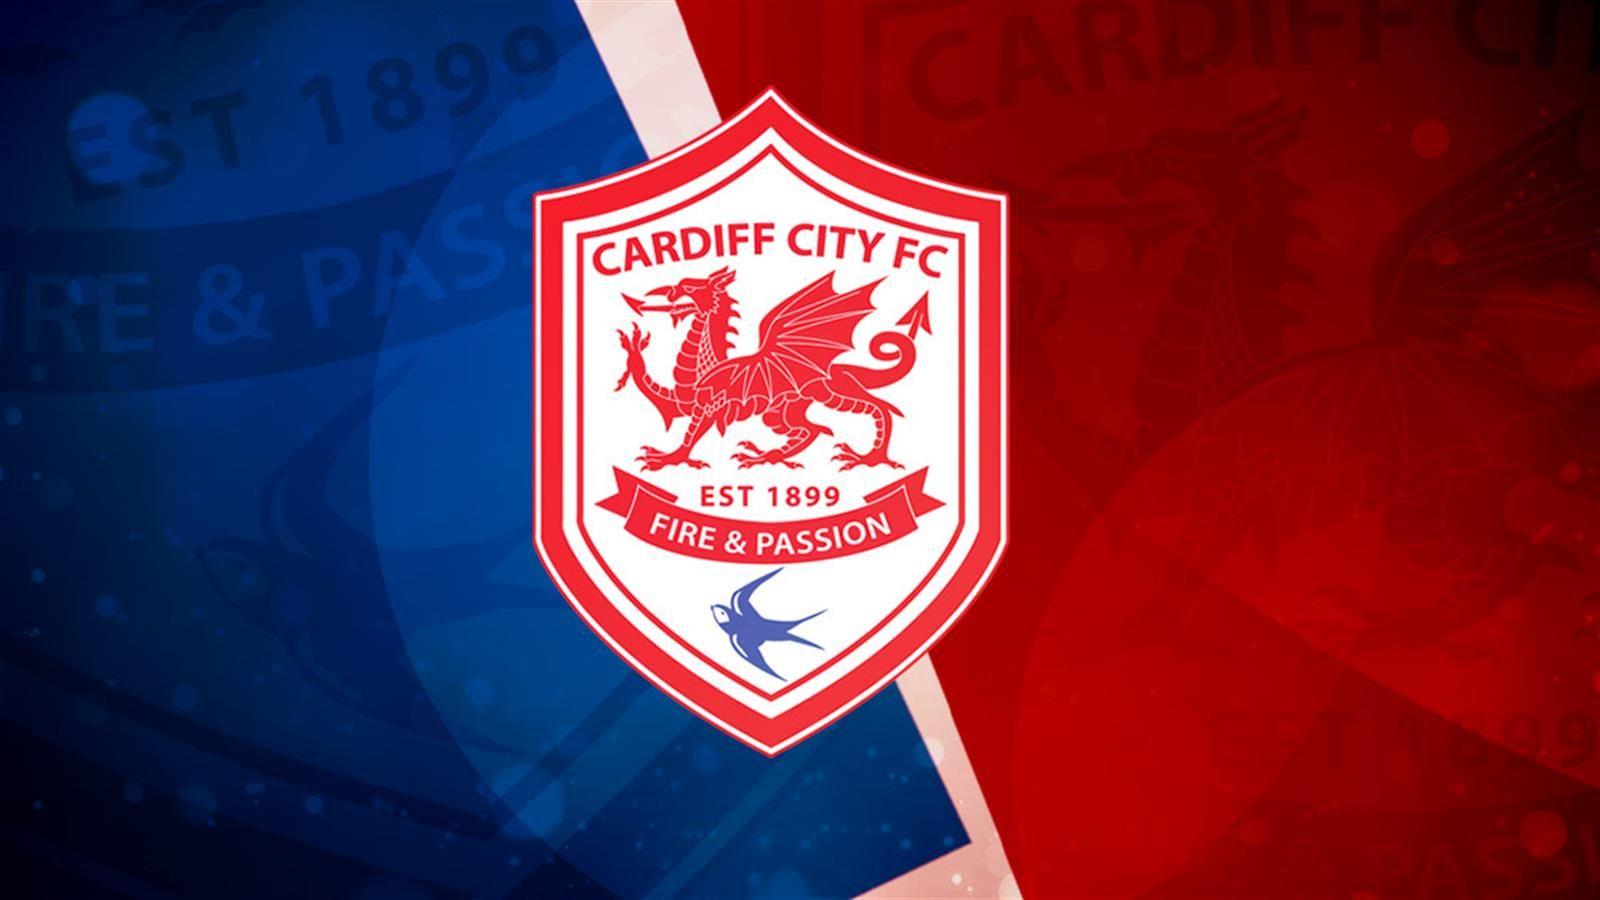 Cardiff City Football Club - Here's a new PC/Mac wallpaper for all # CardiffCity fans. Pullout poster next Weds v Foxes